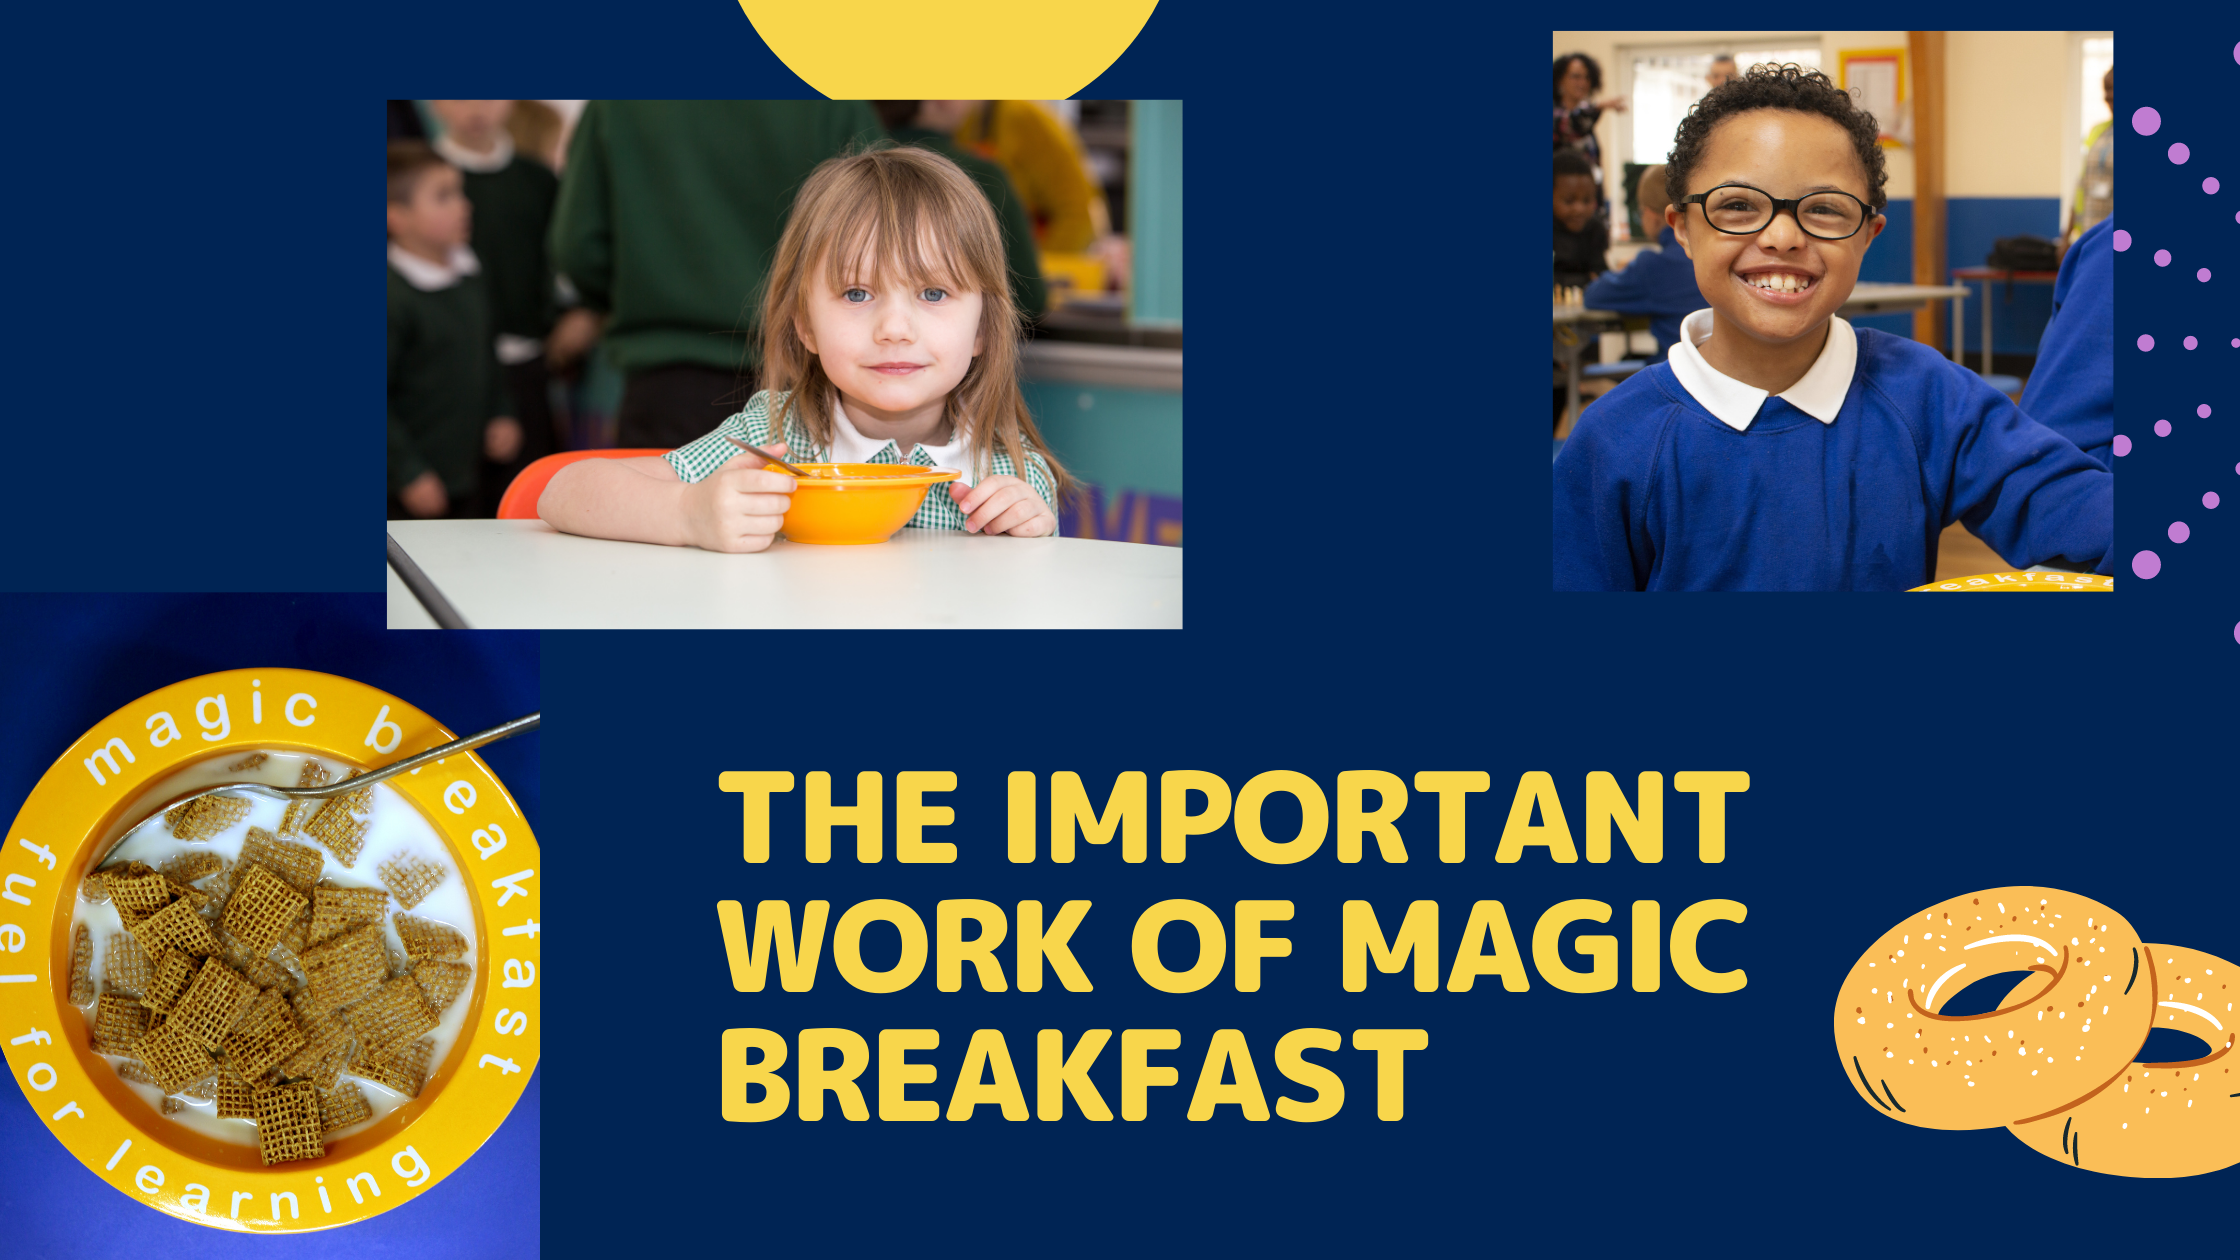 Magic Breakfast - The Inspiration for The Cooking Club Detectives